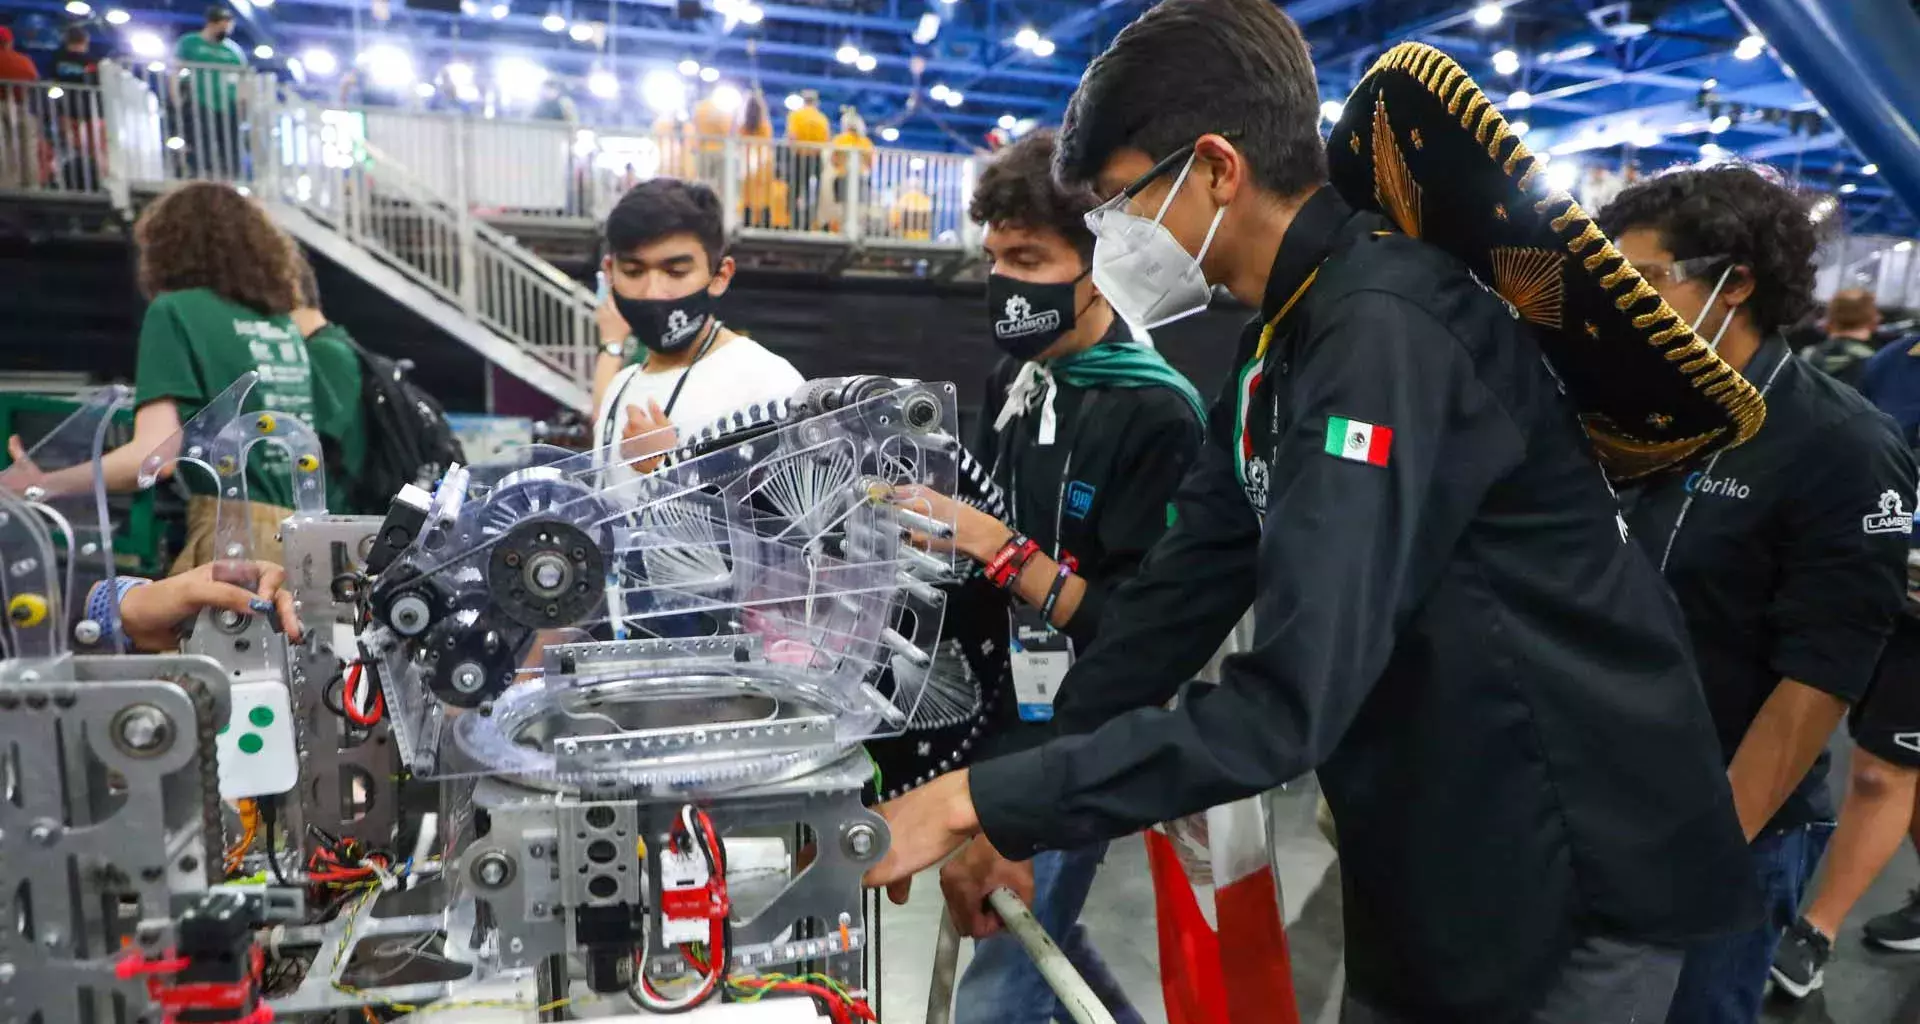 Competitive! Mexicans stand out at the 2022 FIRST Robotics Competition